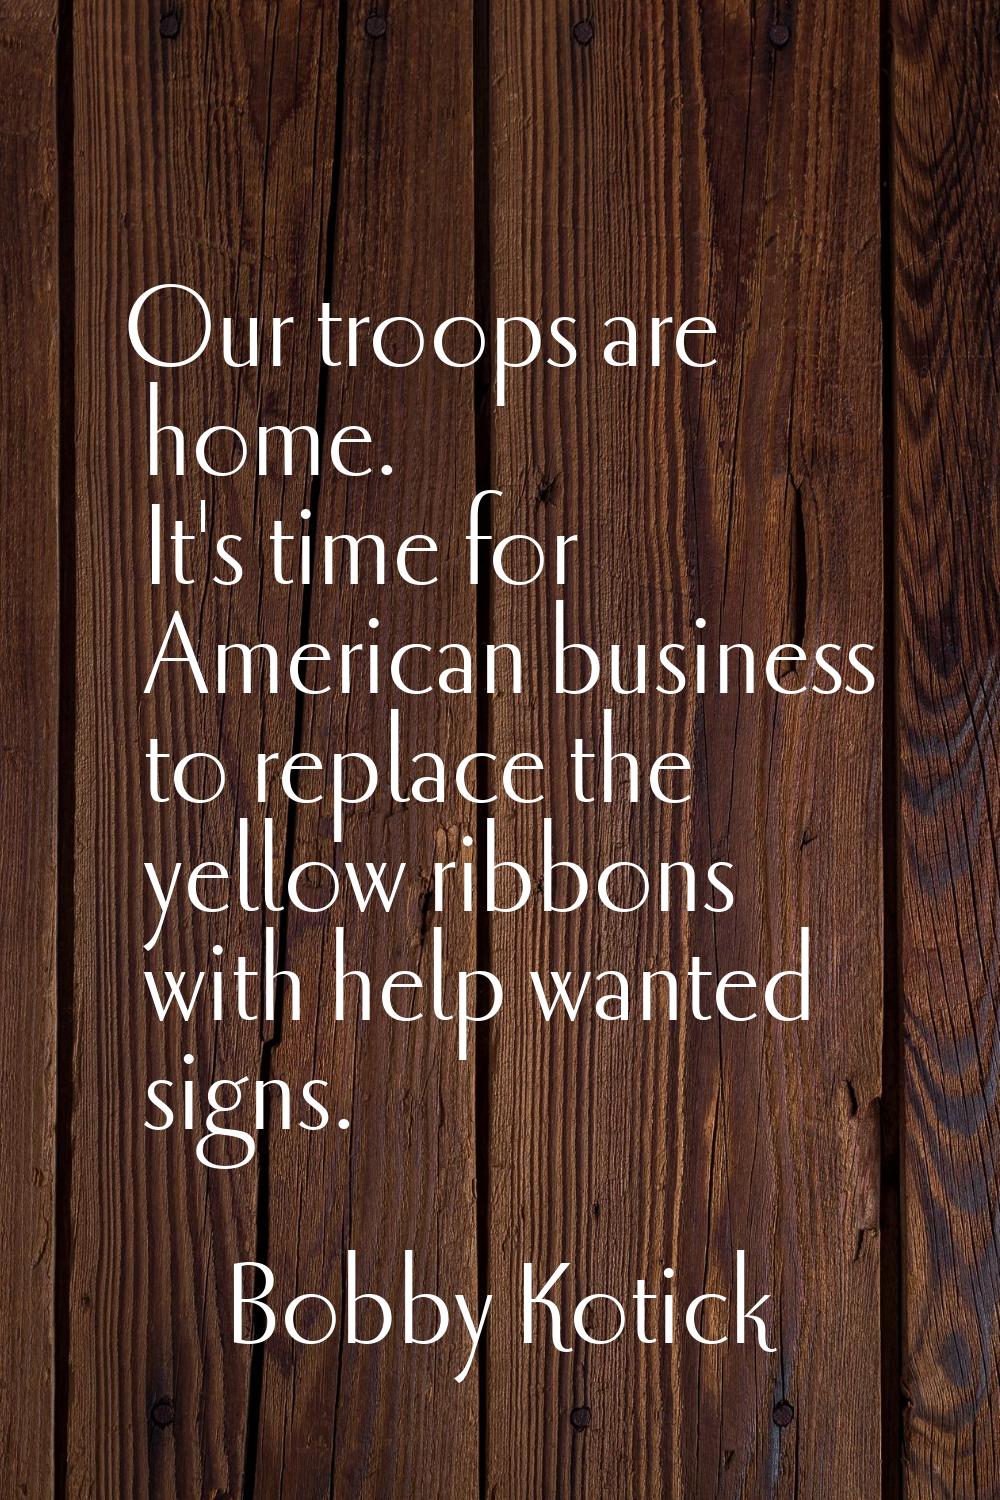 Our troops are home. It's time for American business to replace the yellow ribbons with help wanted